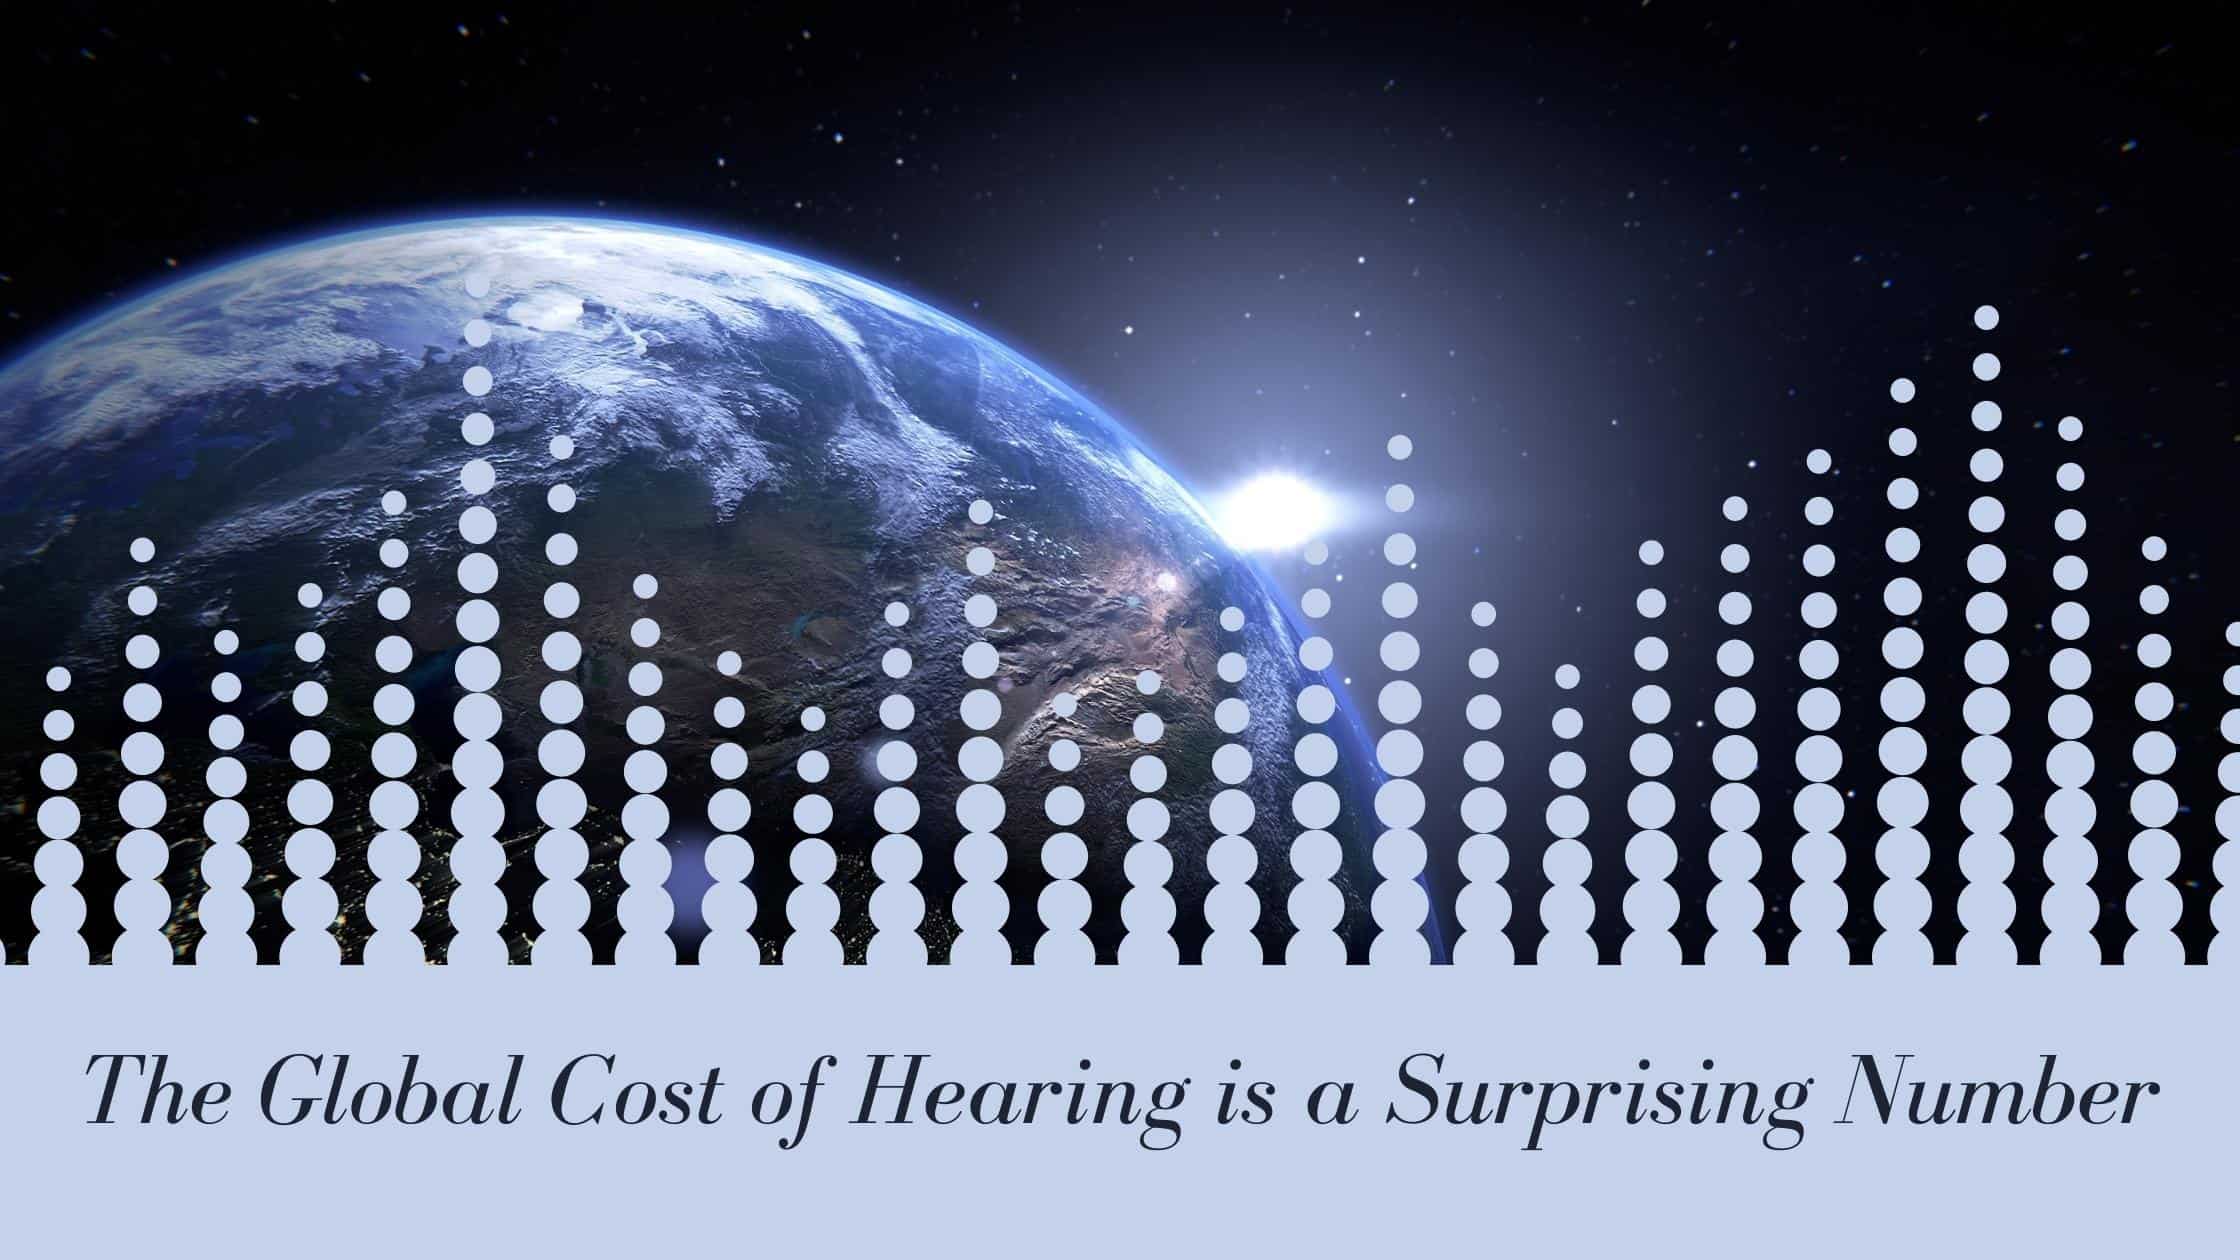 The Global Cost of hearing is a Surprising Number